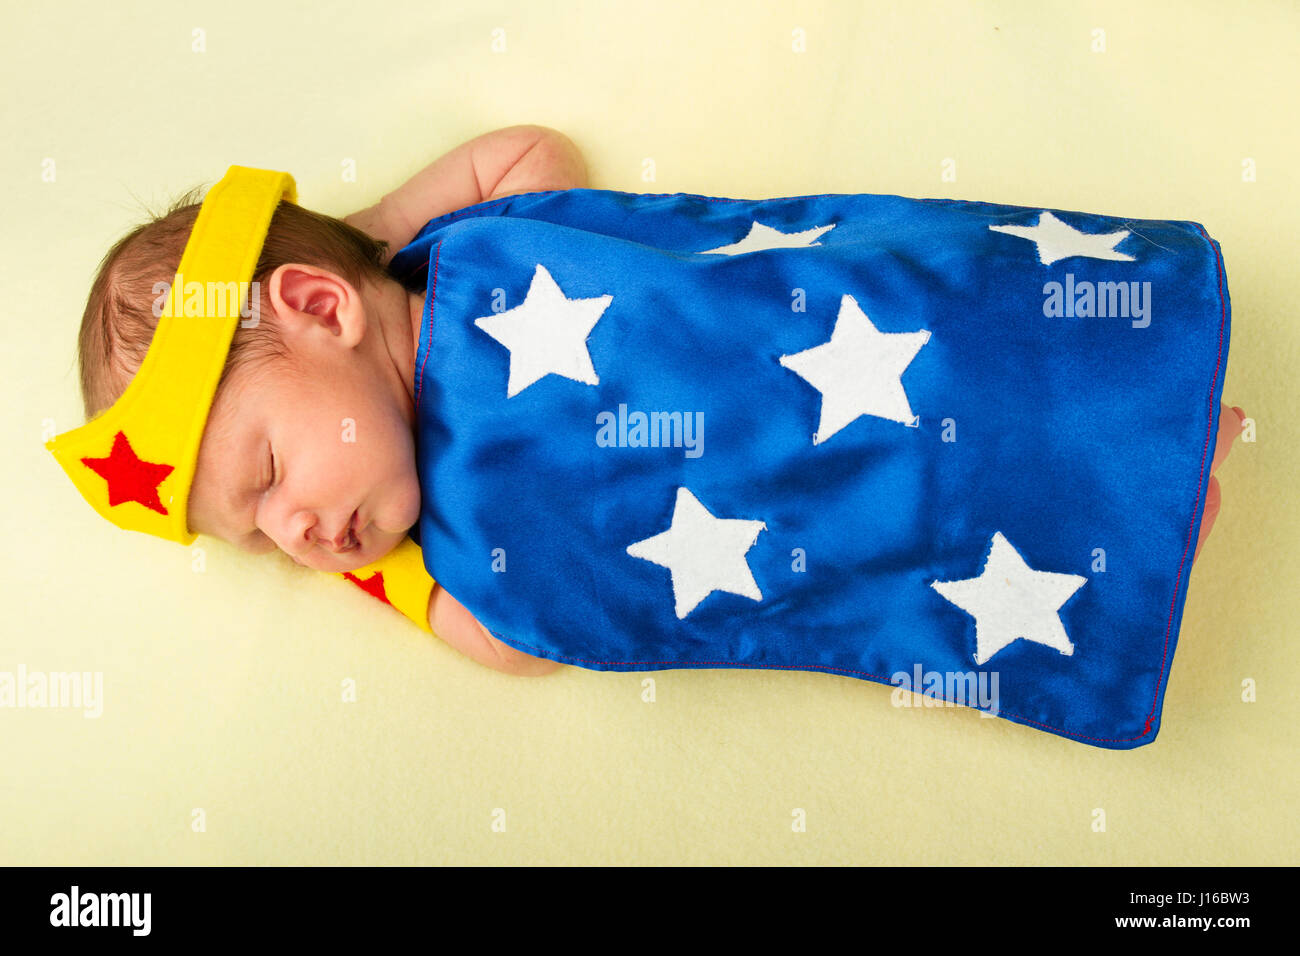 WASHINGTON STATE, USA: Baby Wonder Woman Sleeps. IS IT A BIRD? Is it a plane? No, it’s a pint-sized Superman. From flying faster than a speeding bullet like Superman to web-slinging like your friendly neighbourhood Spiderman these cute baby pictures show mini-superheroes in all their glory. Complete with perfectly created capes, masks and superhero symbols the heart-melting shots of Batman, Batgirl, Superman, Captain America and Wonder Woman showcase the classic superheroes from DC and Marvel comics in the tiny form of babies. Superhero-fan and baby photographer Christy Peterson (43) from Port Stock Photo